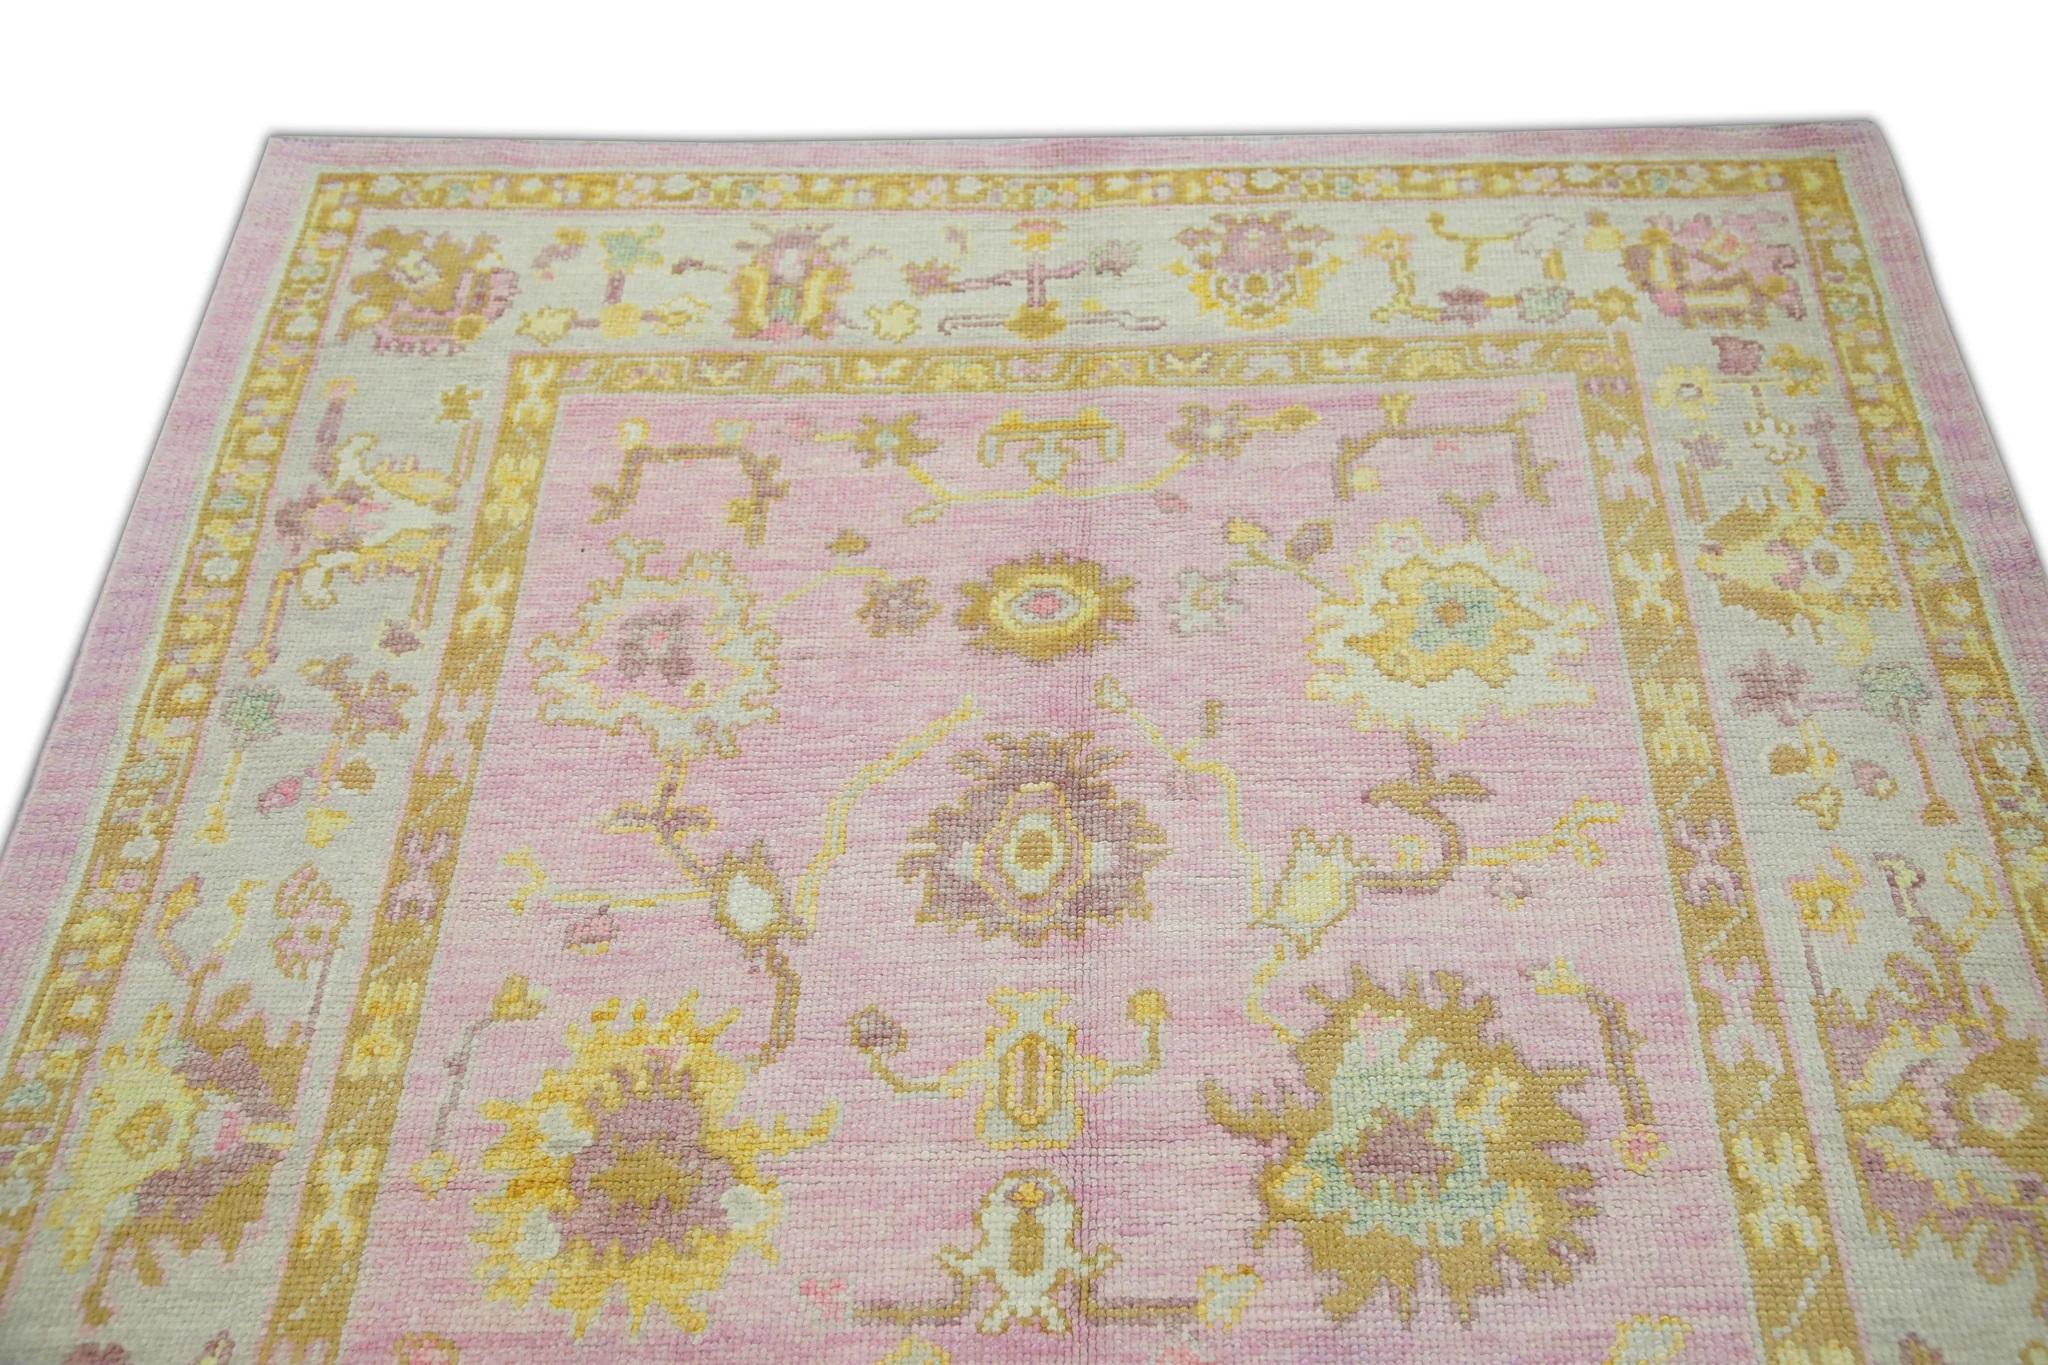 Floral Handwoven Wool Turkish Oushak Rug in Soft Pink and Yellow 5'3